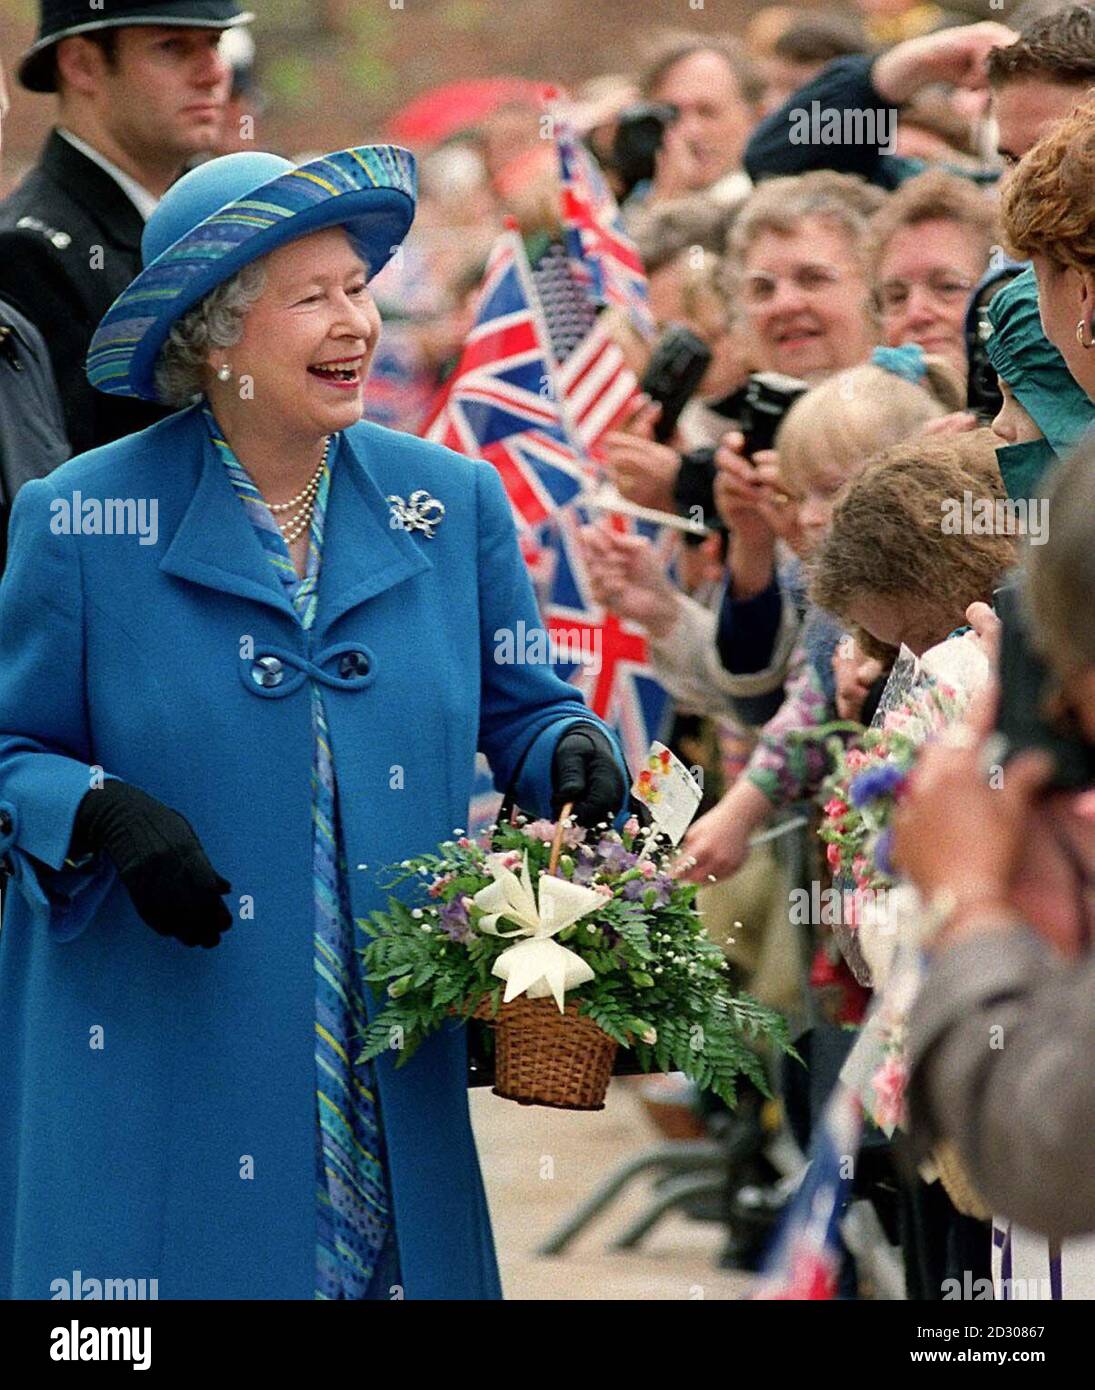 Queen Elizabeth II goes on a walkabout to meet the people of Hull during her visit to the city as part of the Hull 700 celebrations, marking the 700th anniversary of the granting of the Royal Charter to the City, by Edward I. Stock Photo